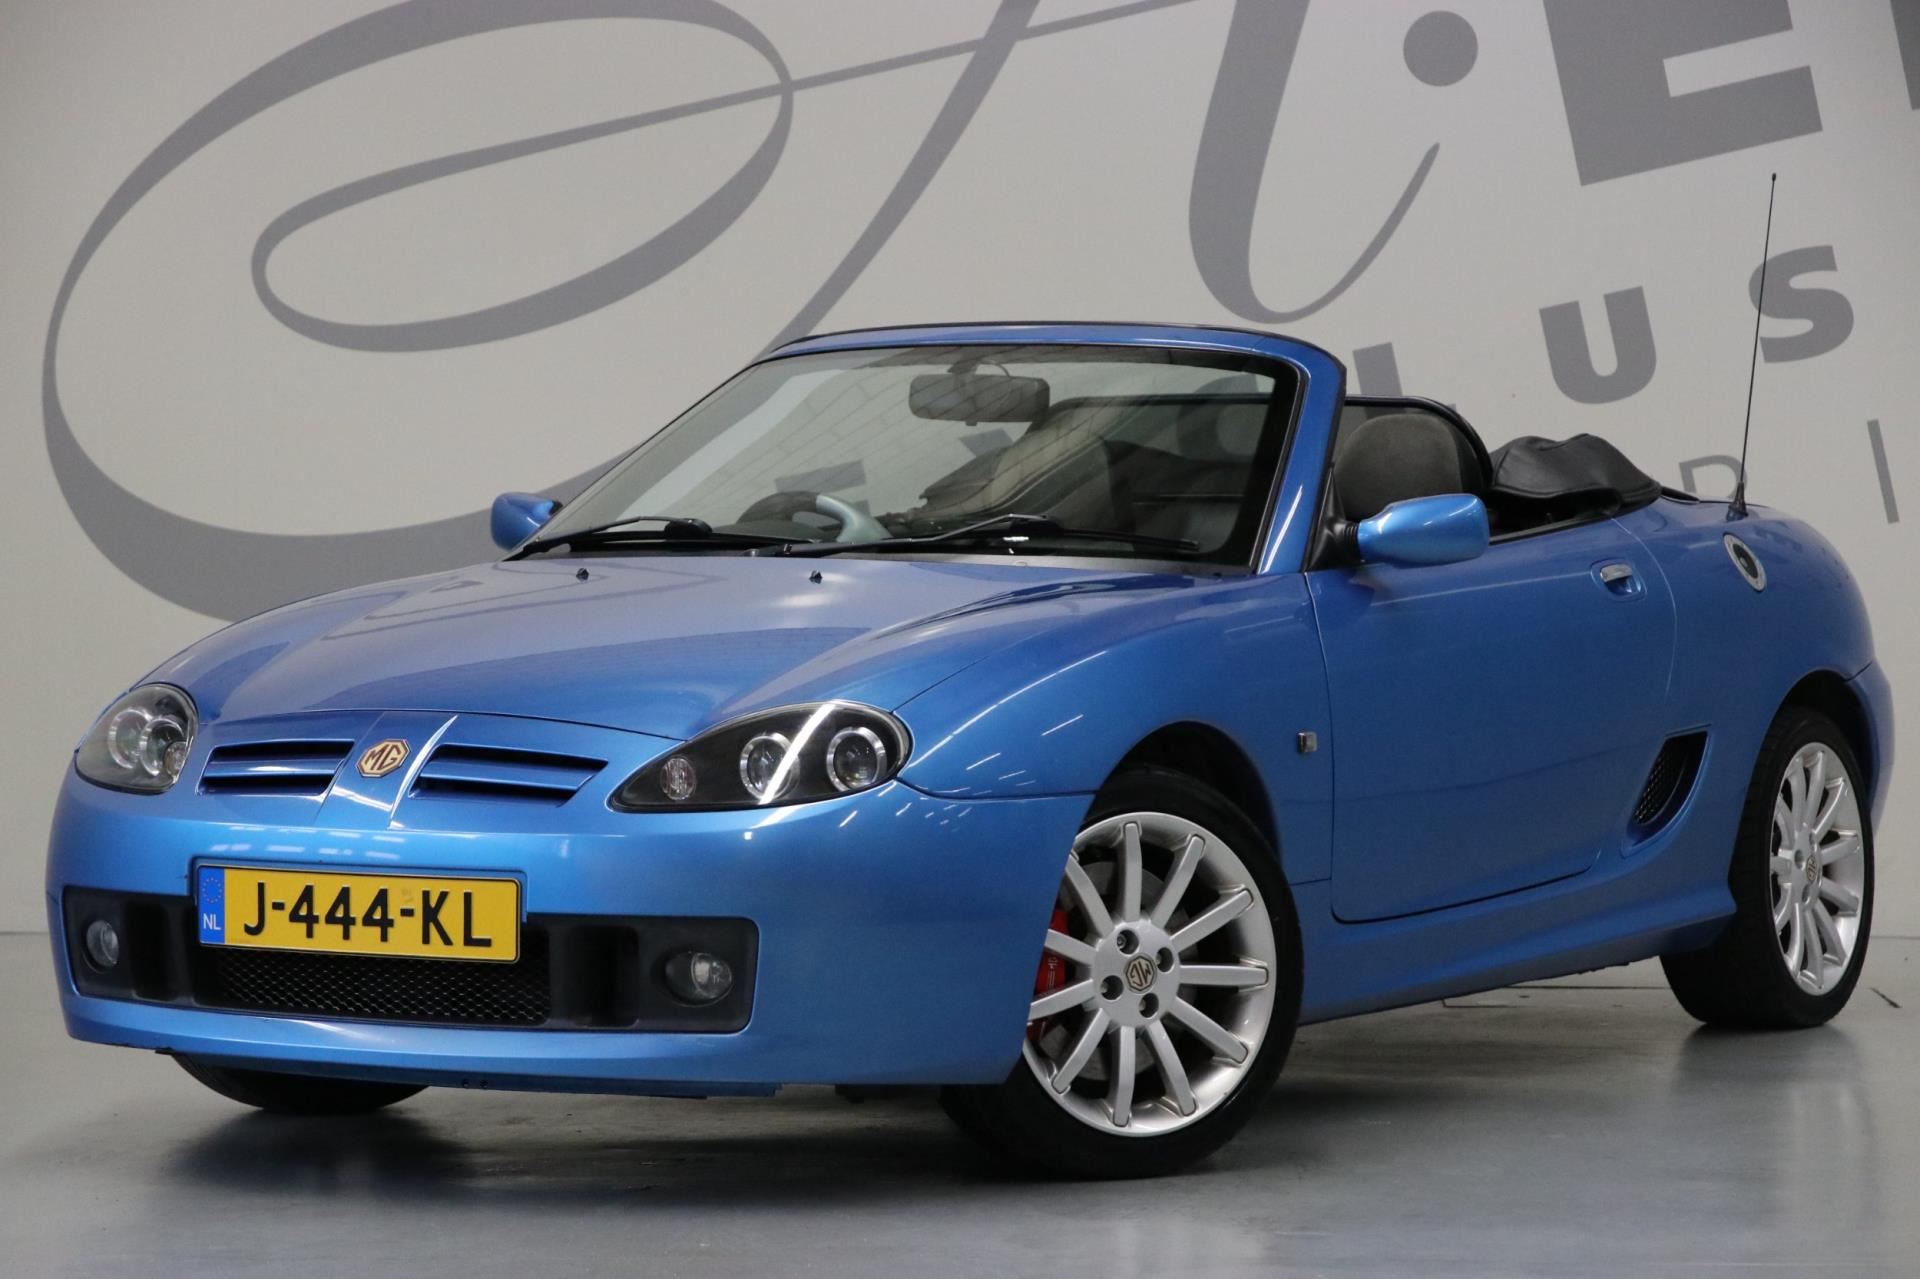 MG TF occasion - Aeen Exclusieve Automobielen